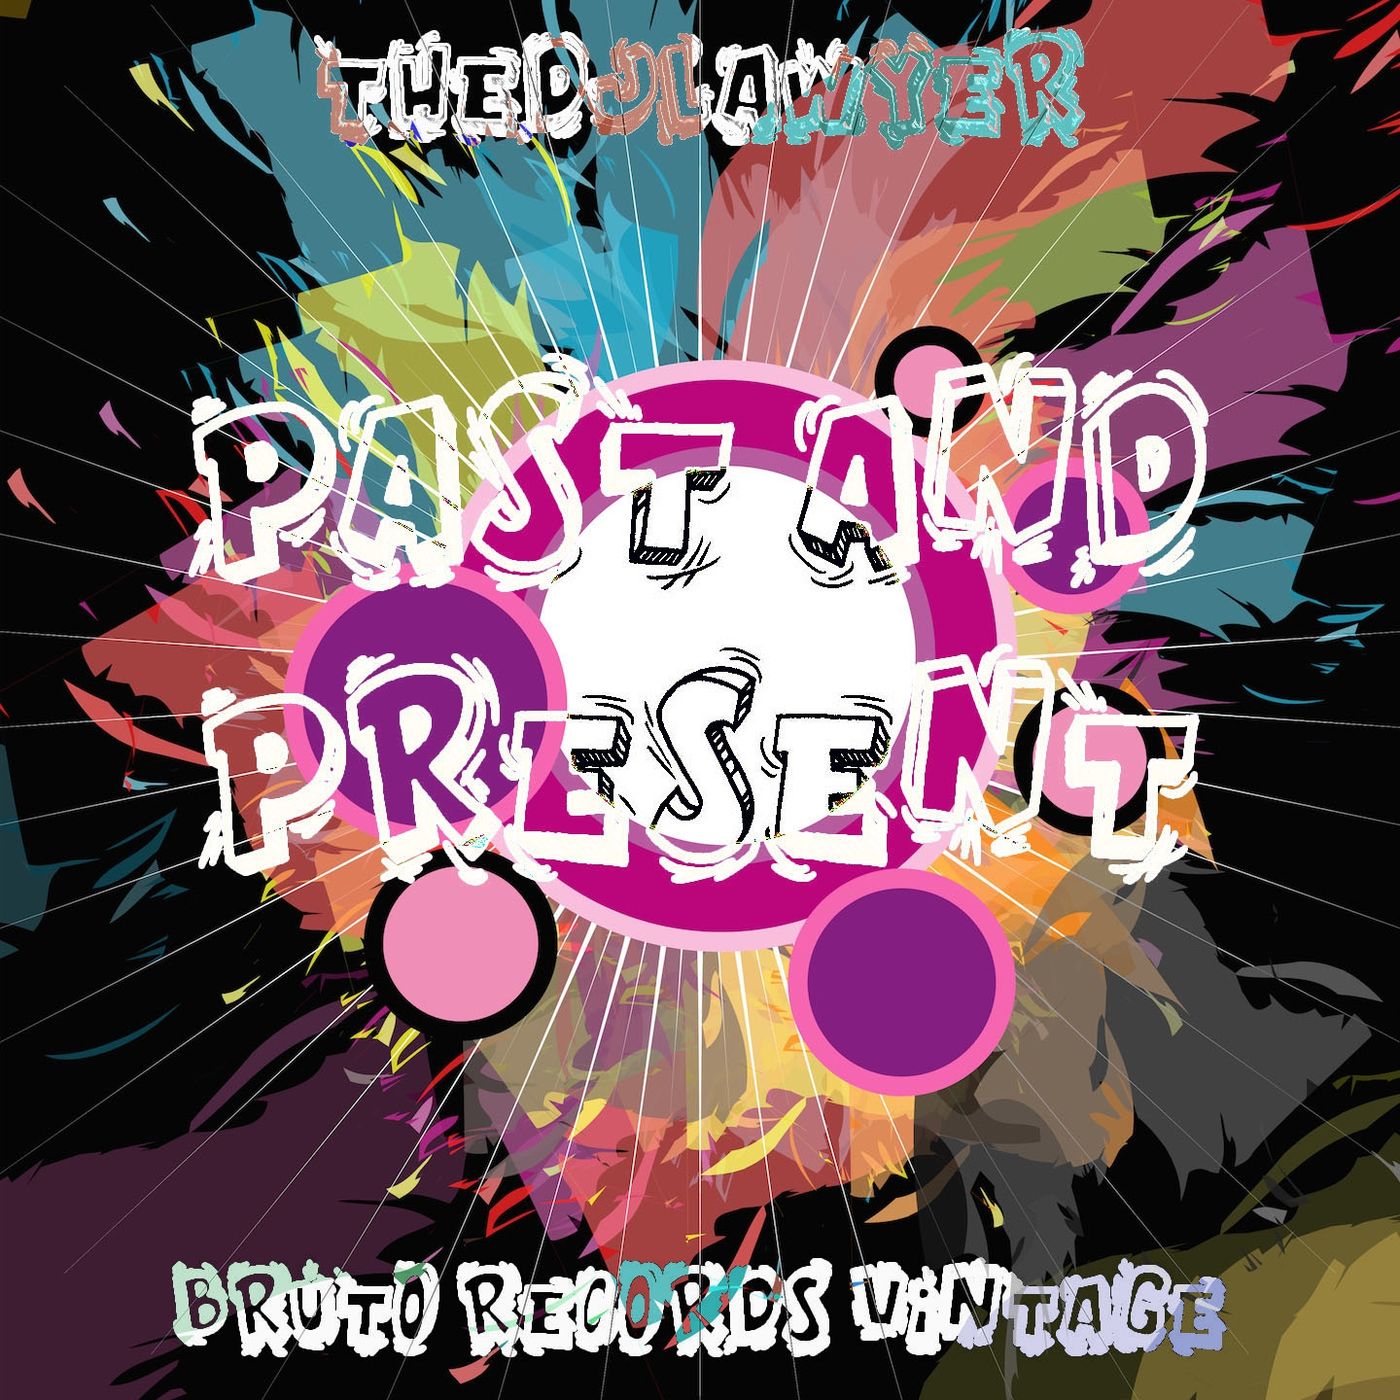 TheDJLawyer - Past and Present / Bruto Records Vintage